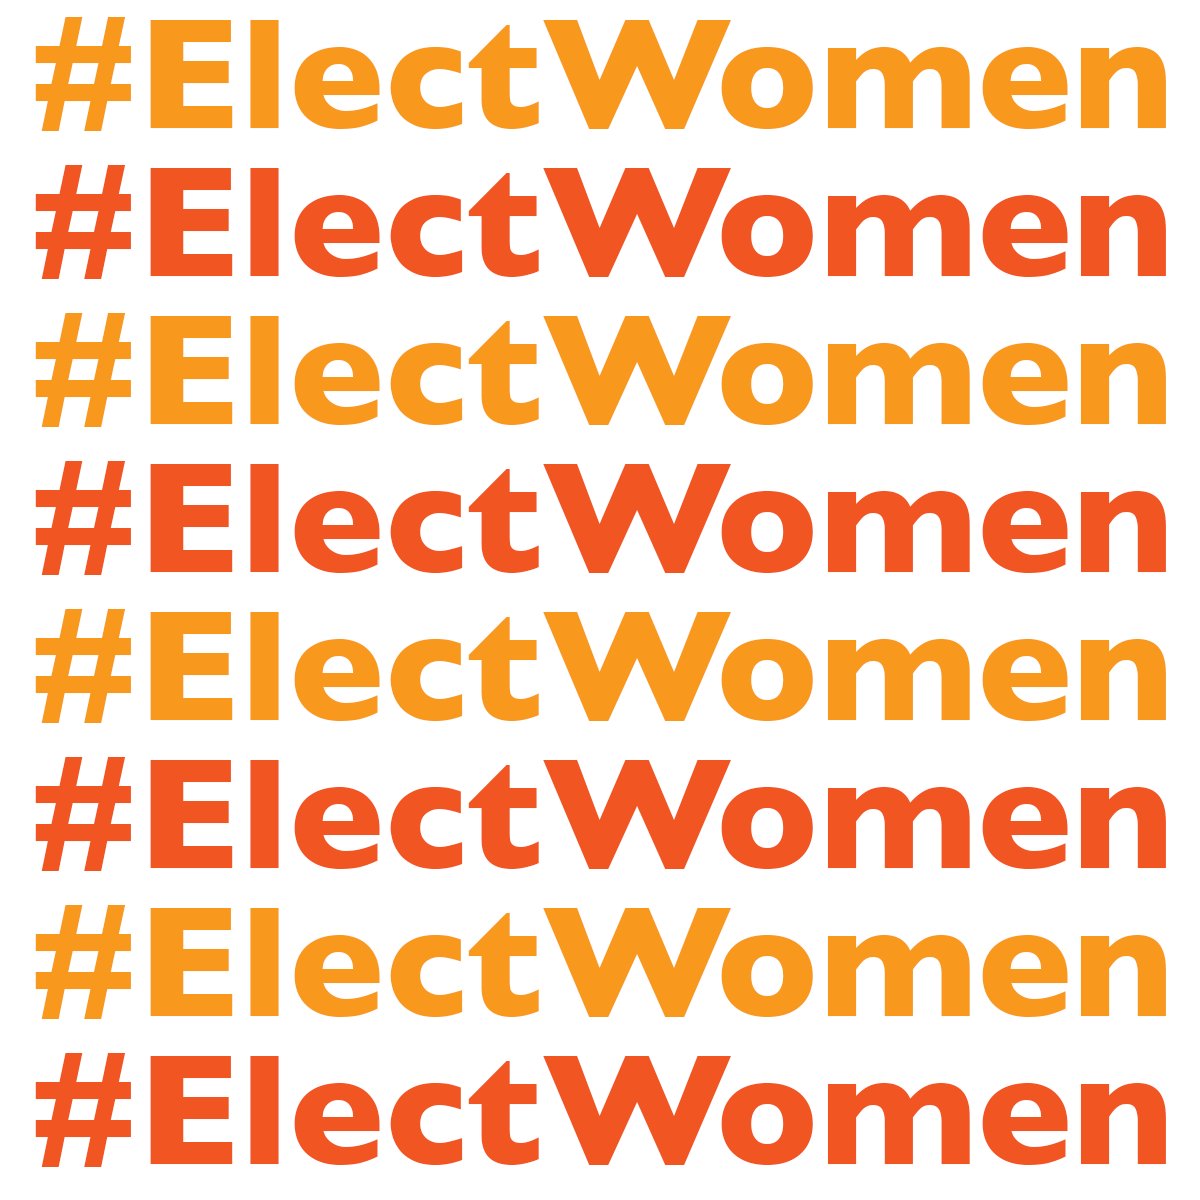 SWEEP! Last night, all TWENTY of our endorsed pro-choice Democratic women in Ohio, North Carolina, and Indiana advanced through their primary elections! Momentum is building, and this November, we're going to #ElectWomen.